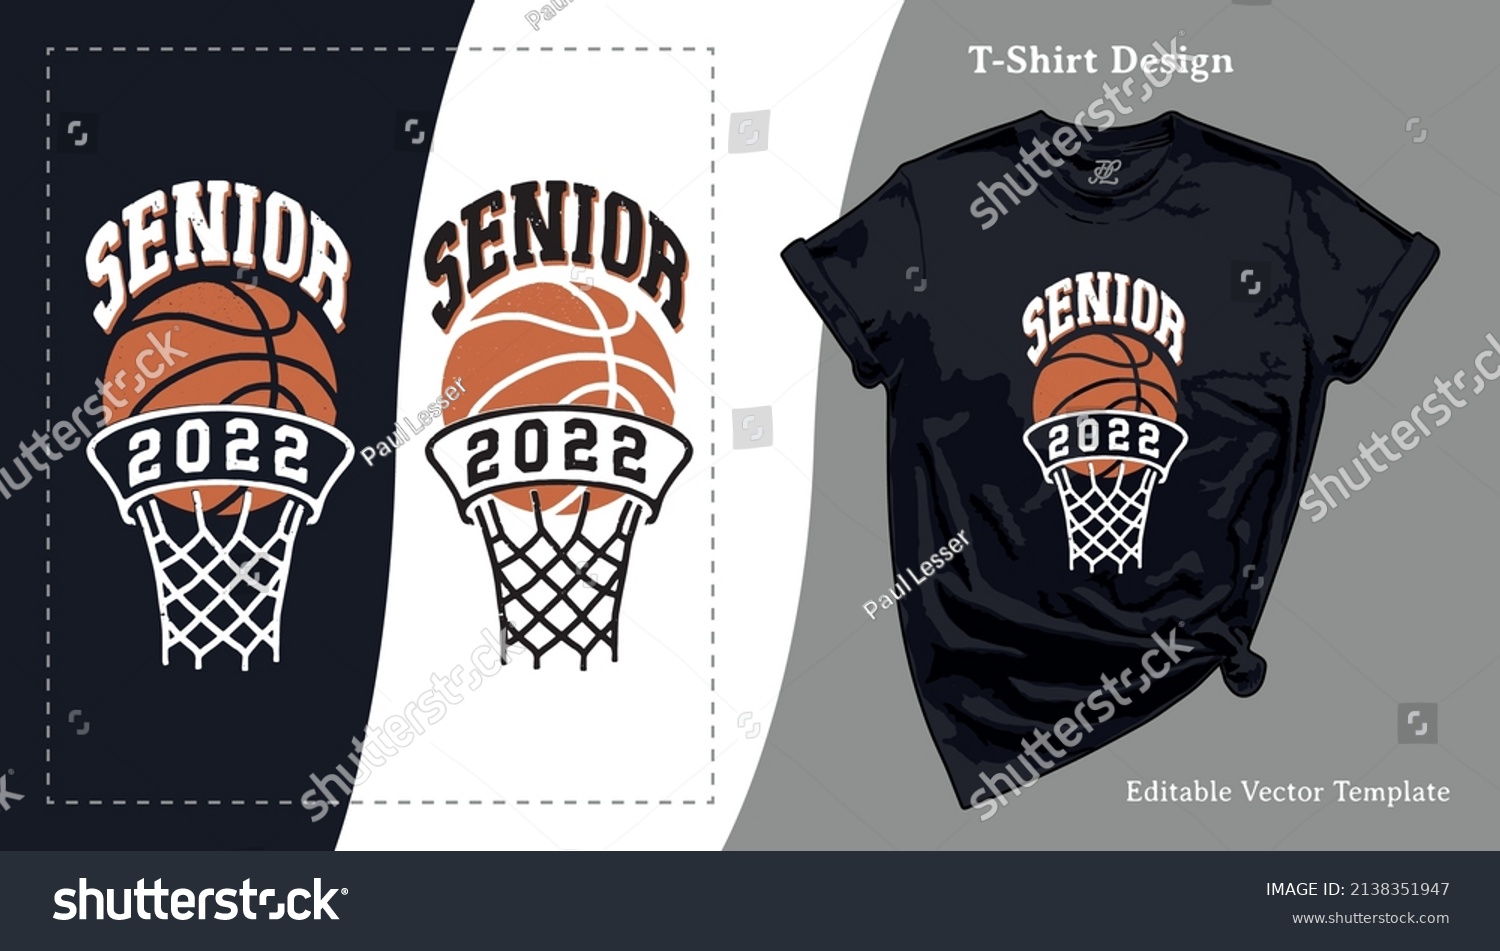 SVG of Senior Basketball 2022 Vector T-Shirt Design. Senior Night Party Basketball, Graduation Gift T shirt Template with a Hand-lettering for Print on Demand Tee, Apparel, Clothing, SVG and Screen Print svg